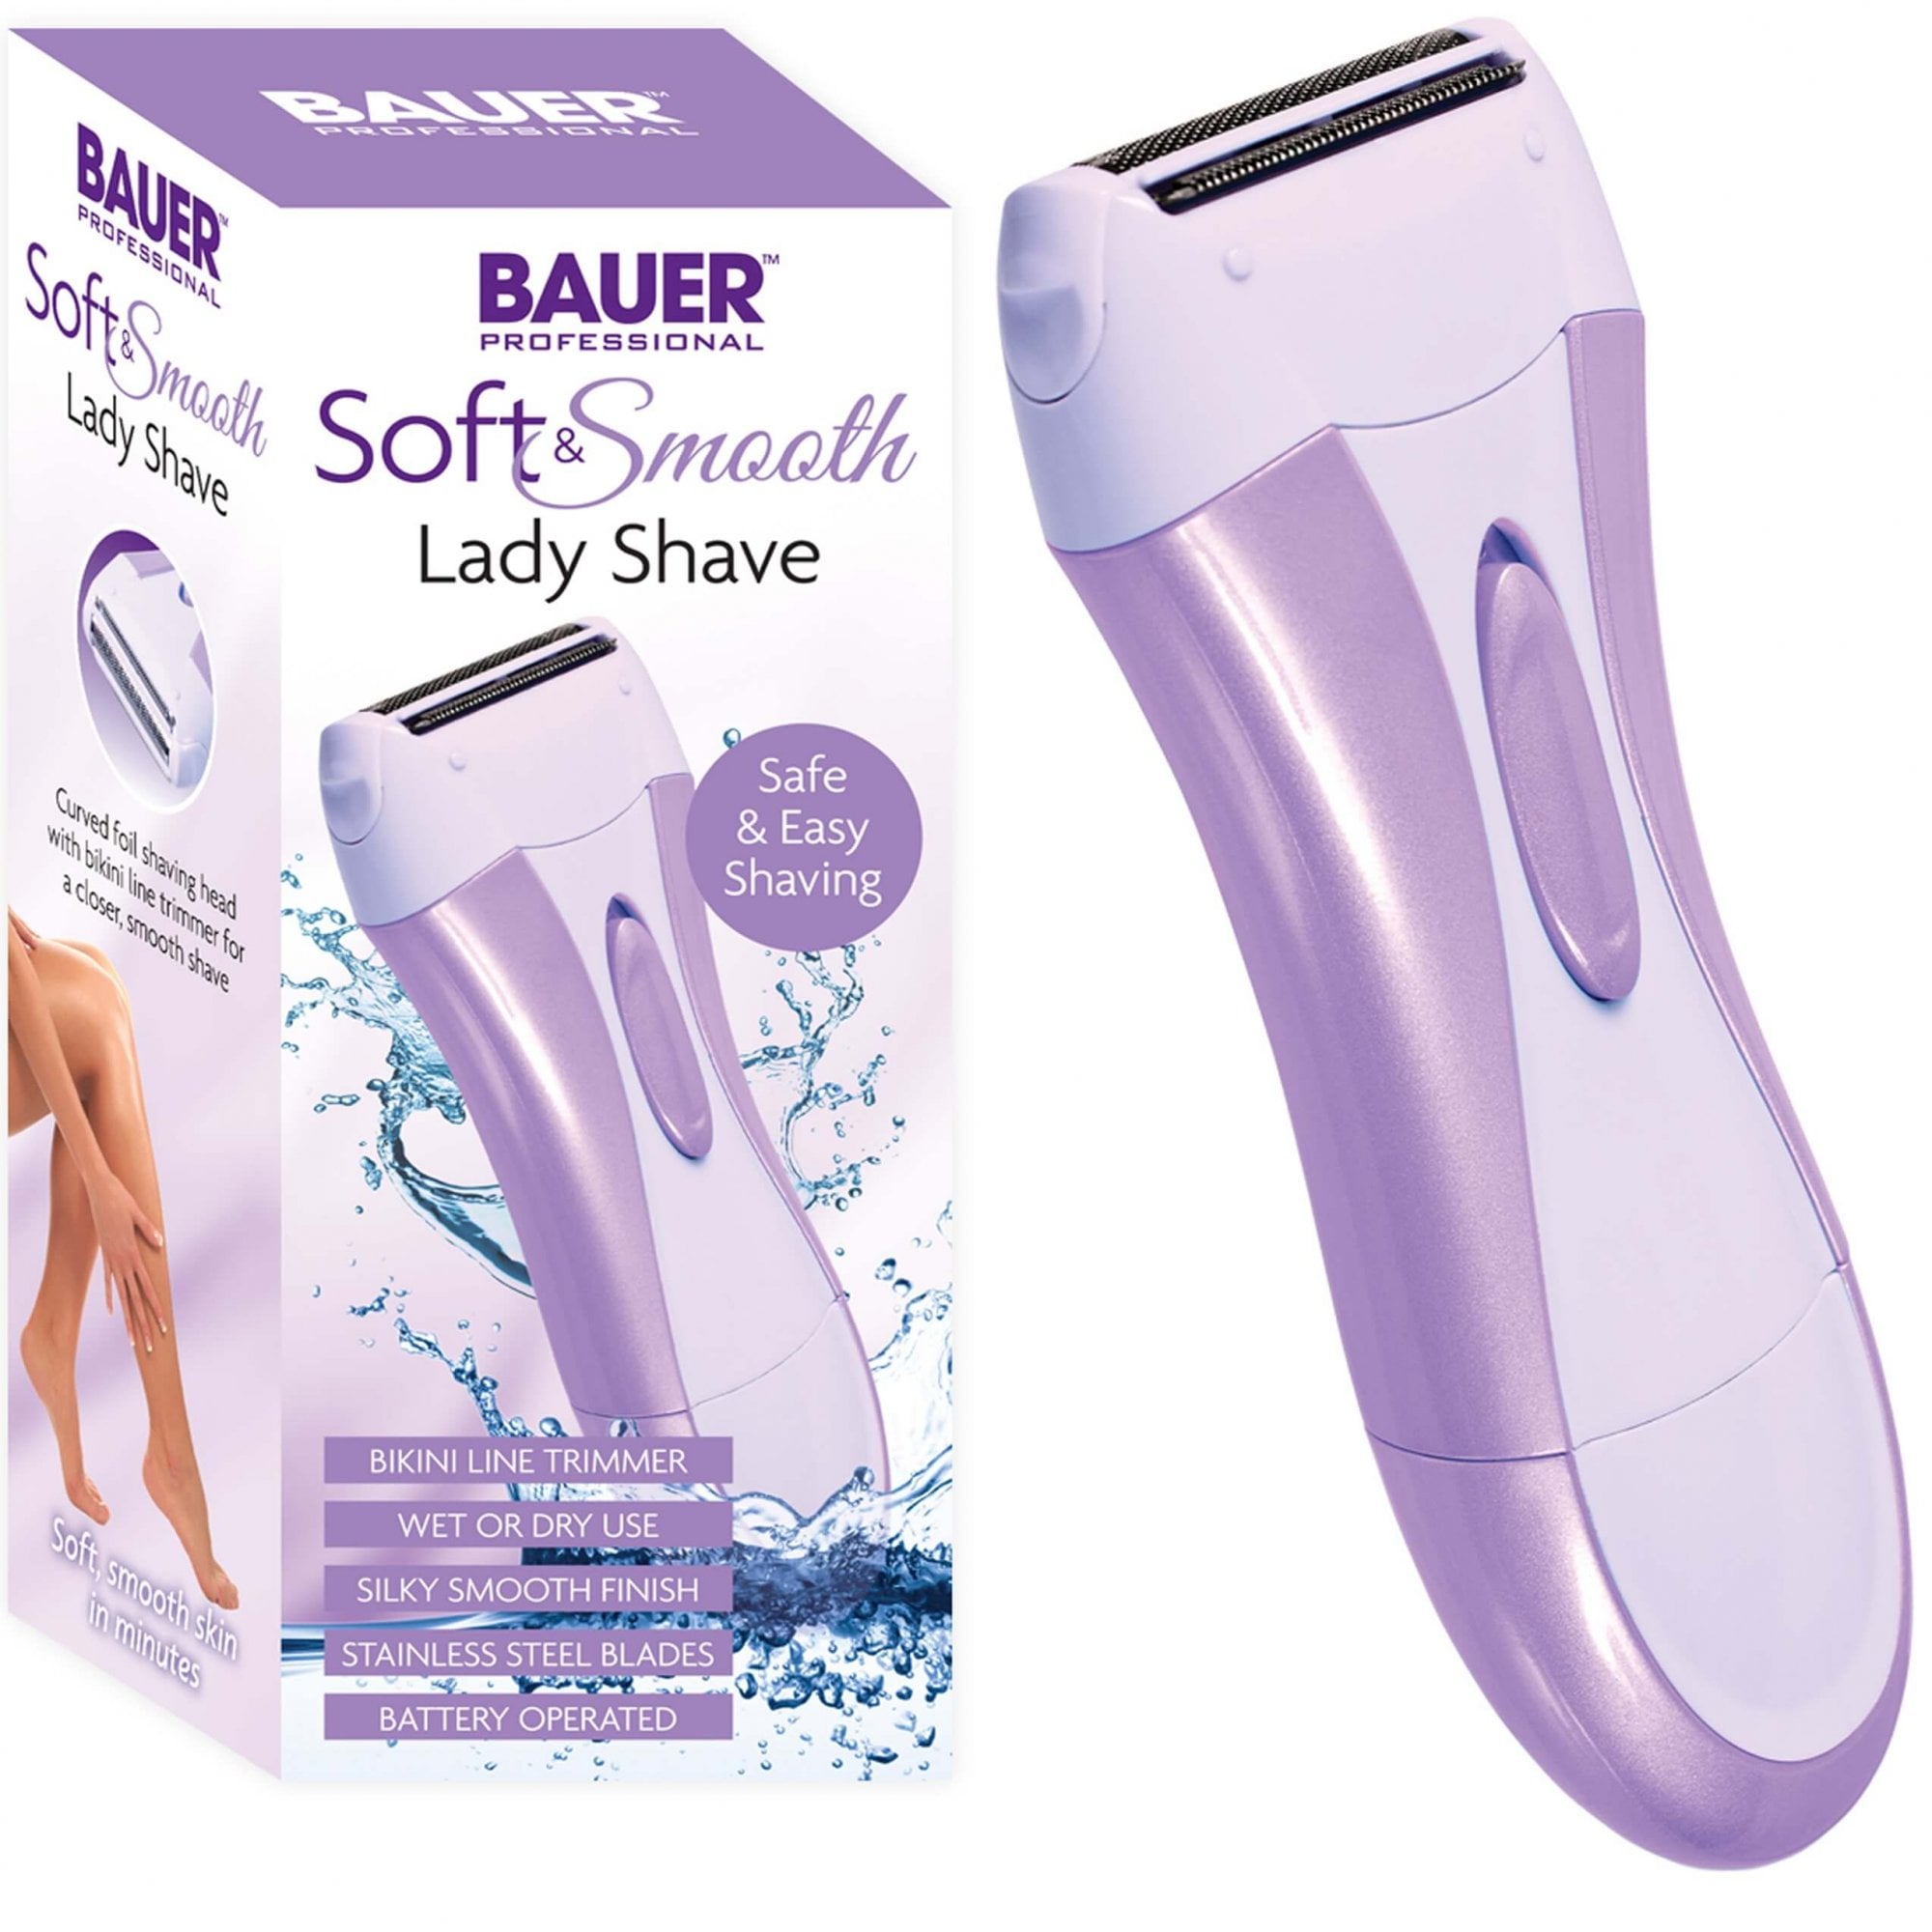 BAUER Battery Operated Soft and Smooth Lady Shave  | TJ Hughes